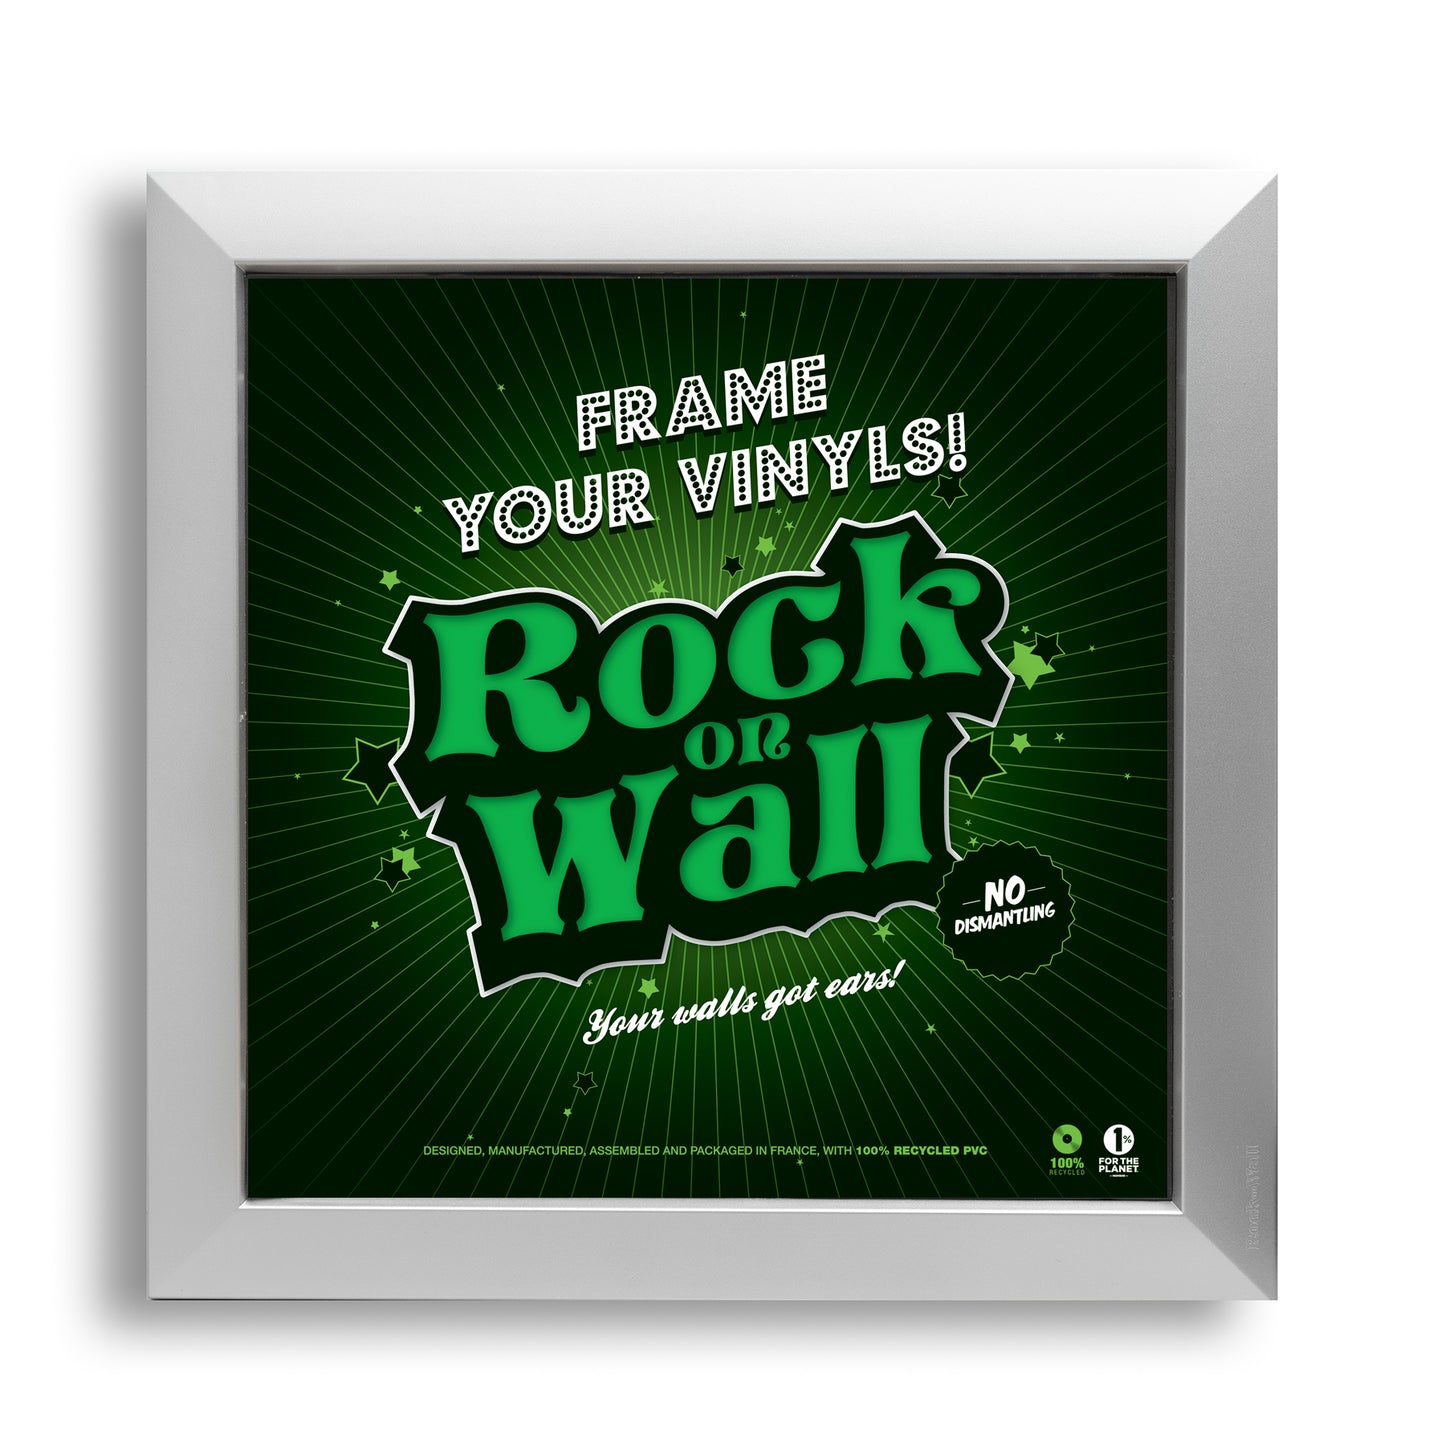 Silver Vinyl Record Frame by Rock on Wall